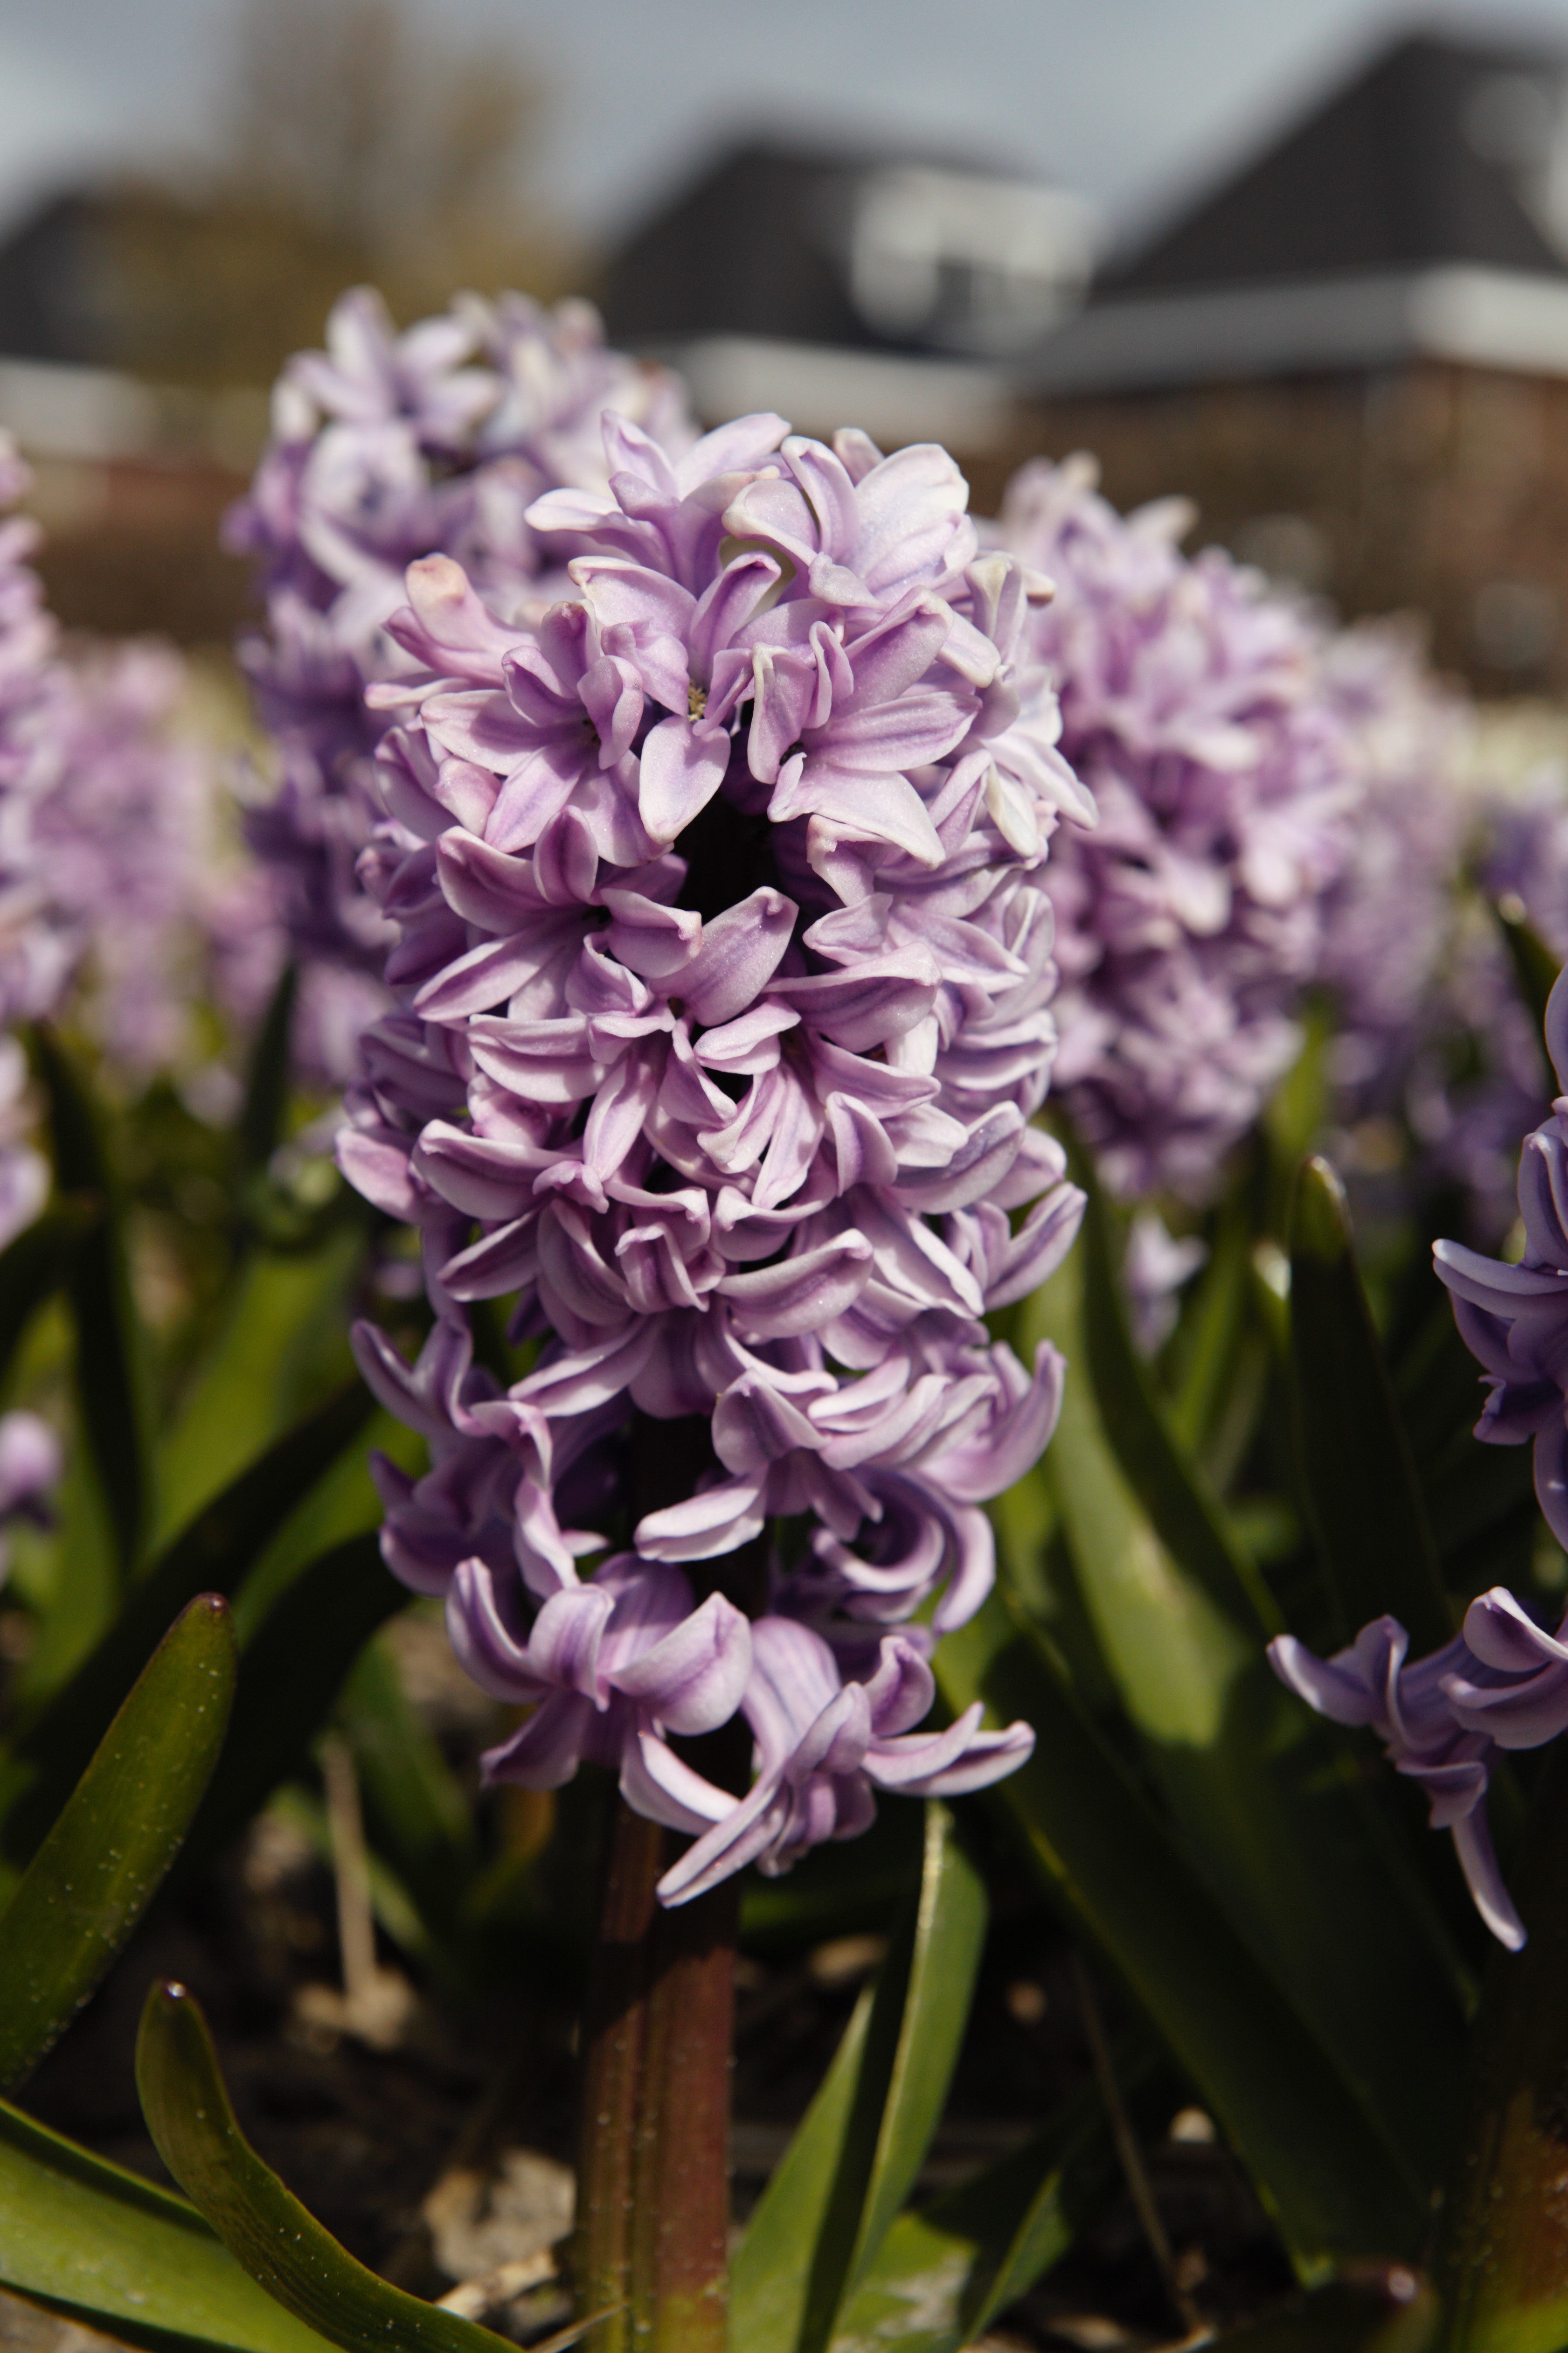 Close-up of Hyacinth Splendid Cornelia with violet flowers in garden